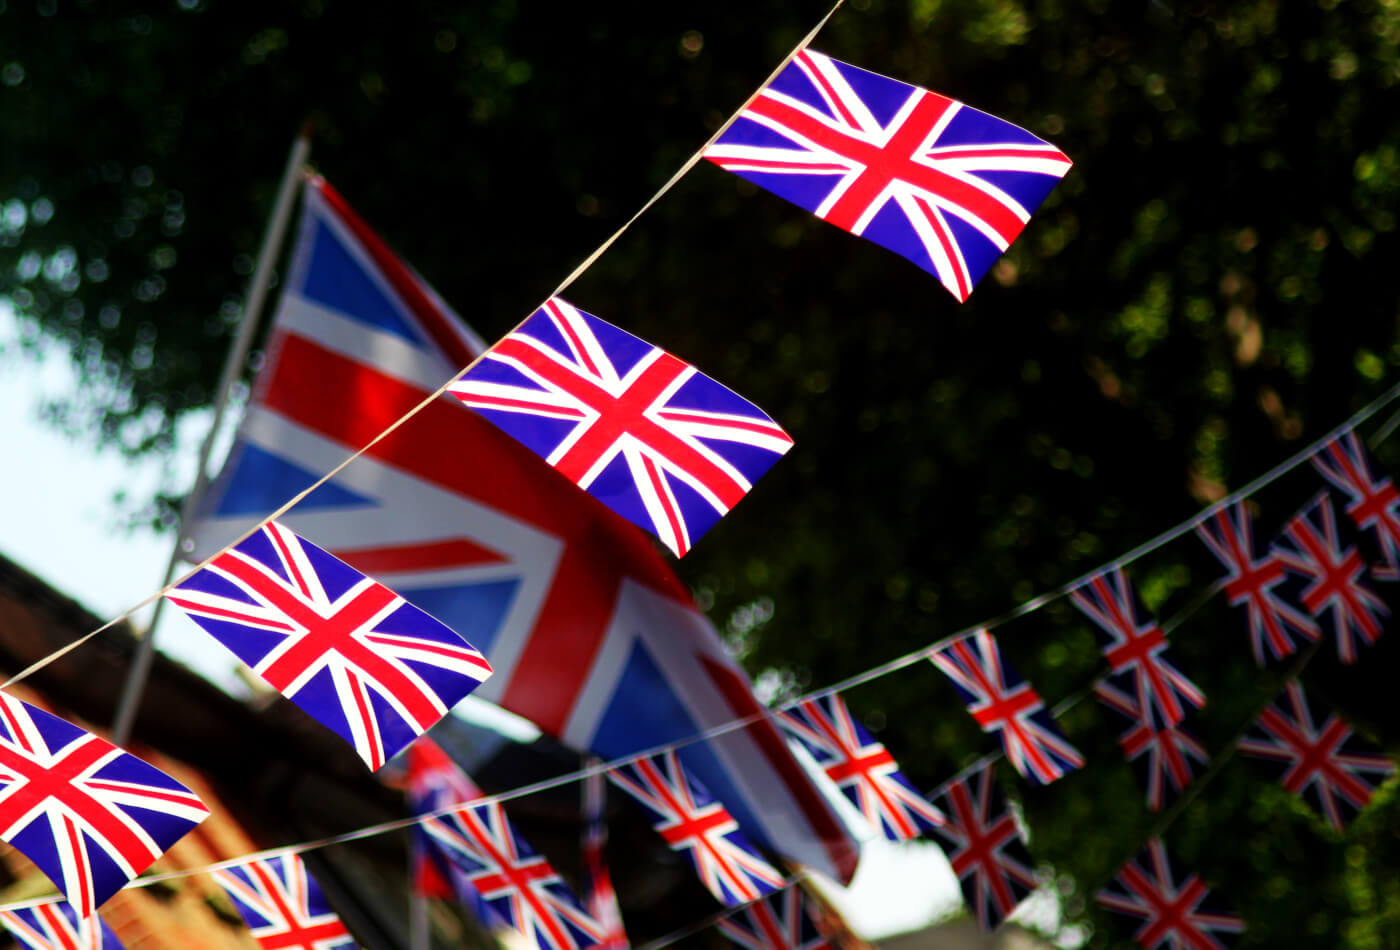 jubilee party decorations